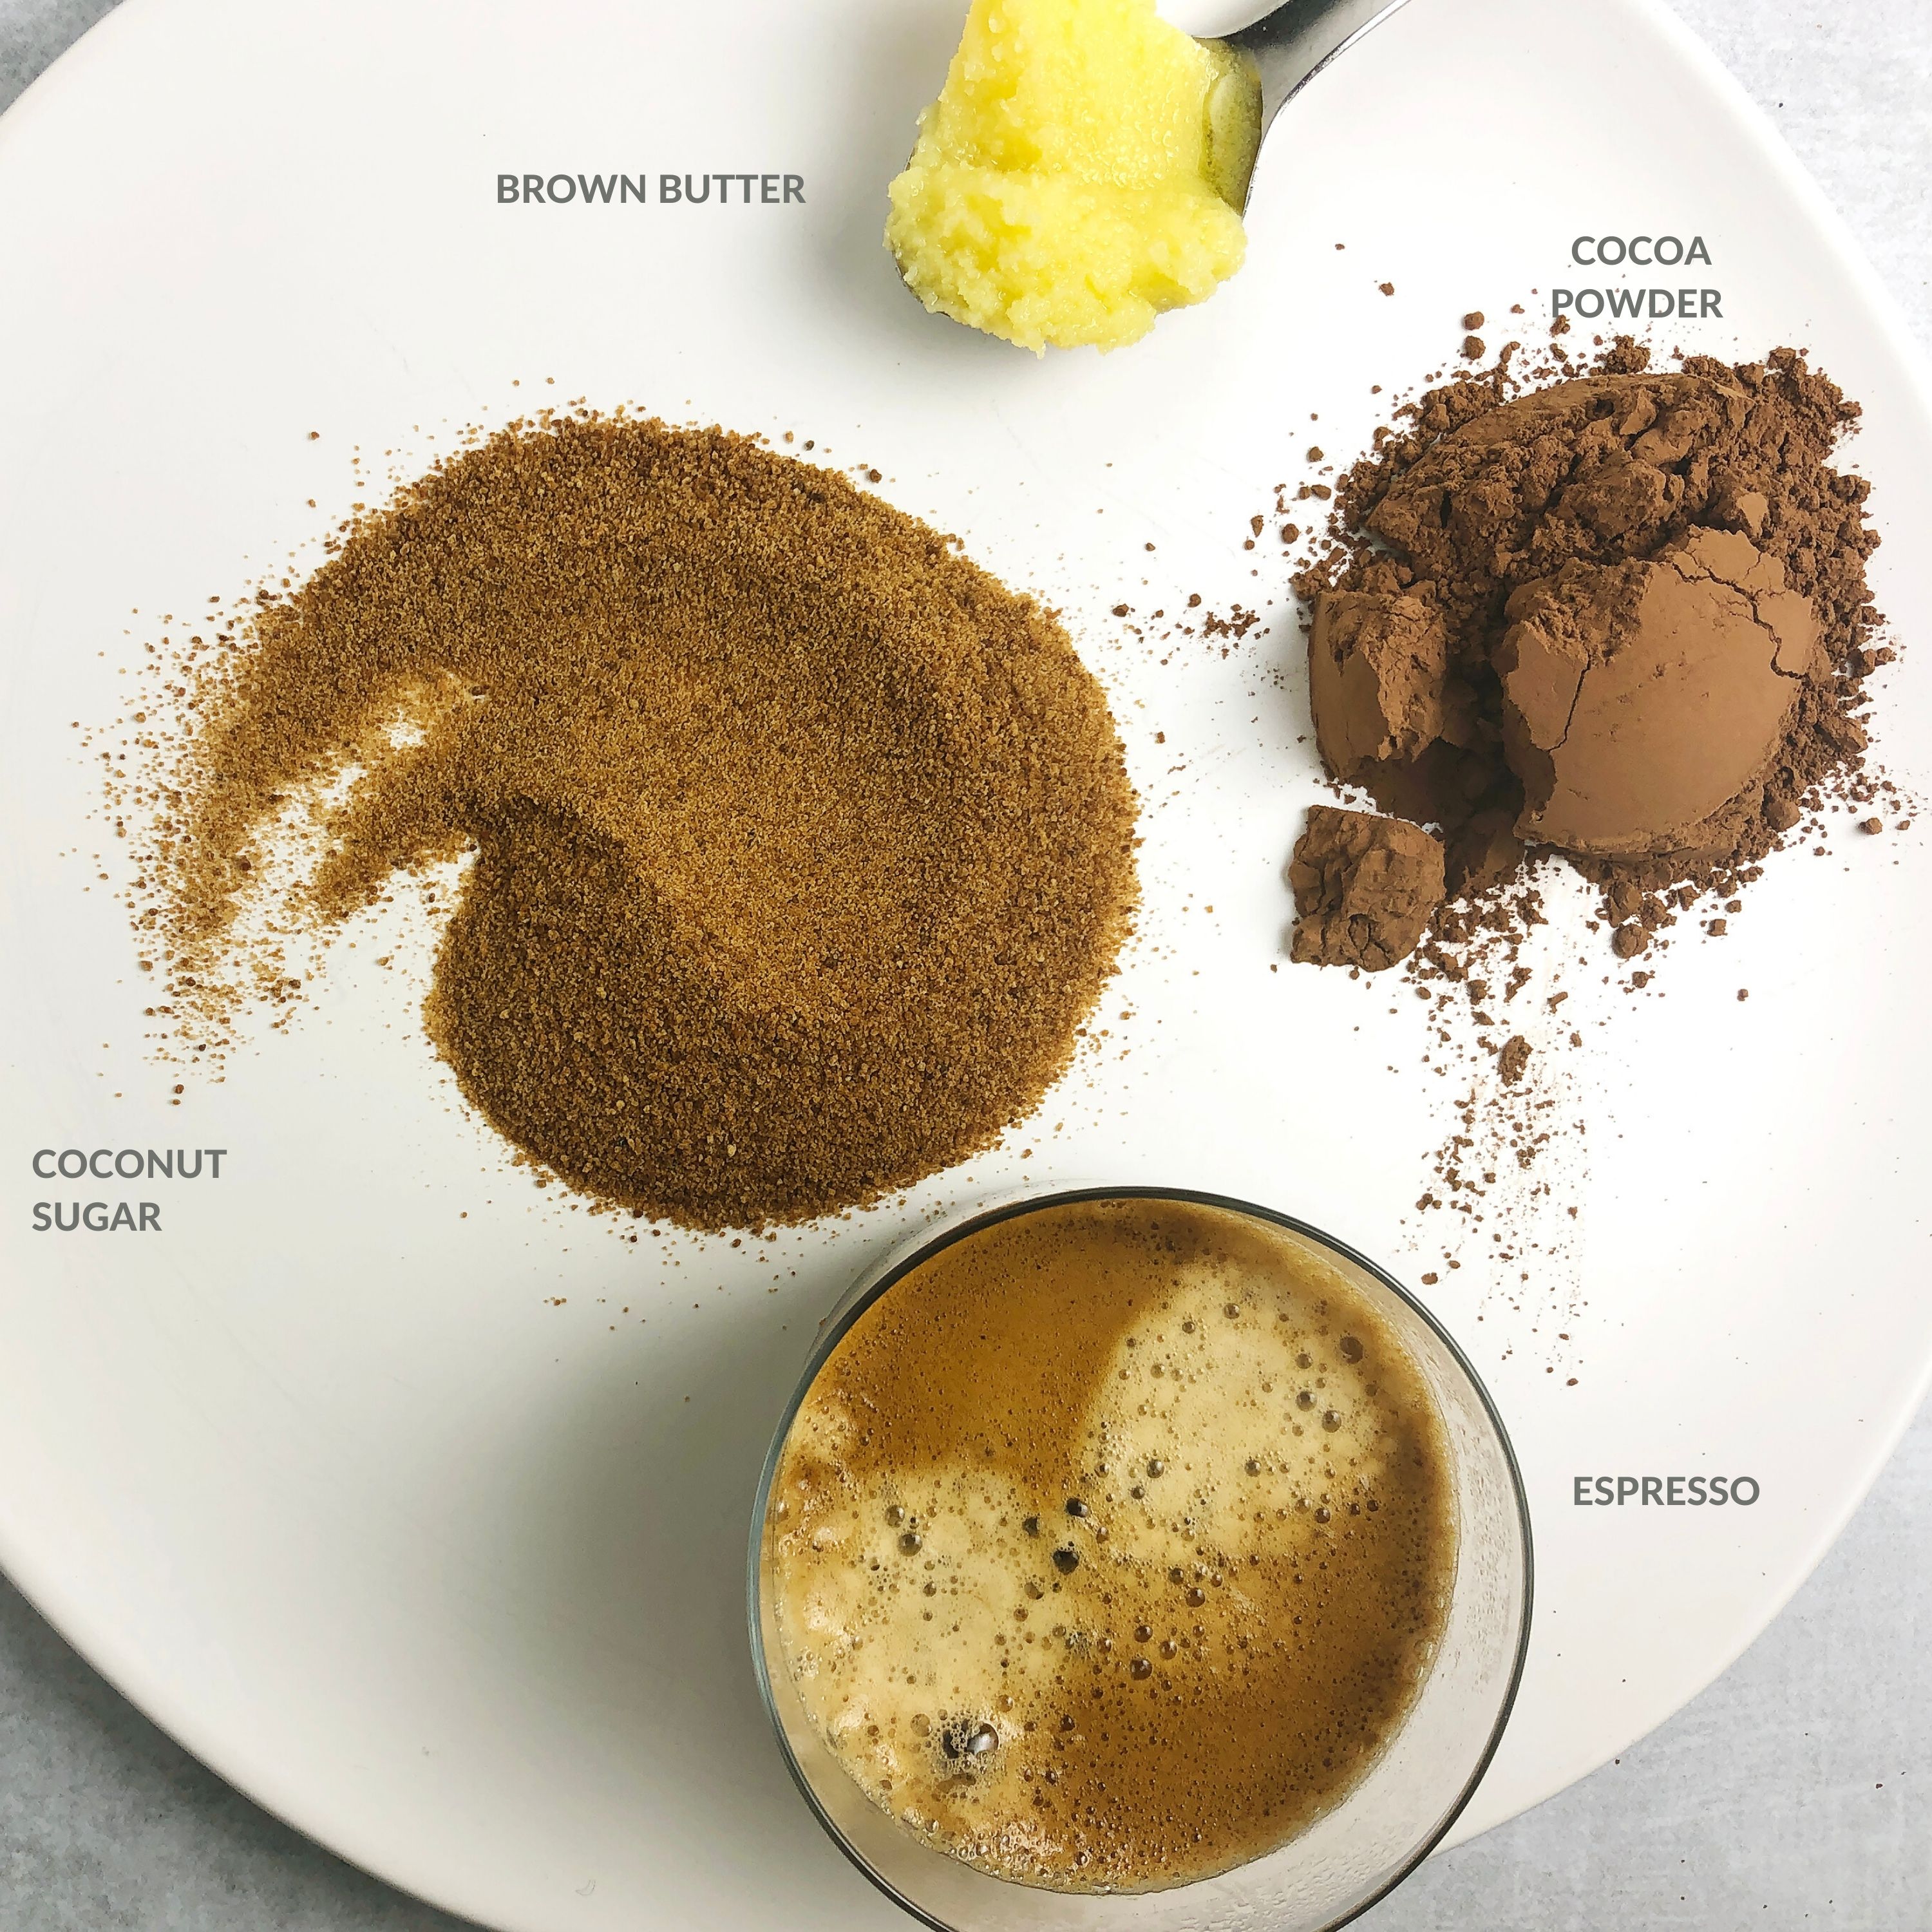 Top-down view of ingredients for Brown Butter Chocolate Syrup, including brown butter, cocoa powder, espresso, coconut sugar